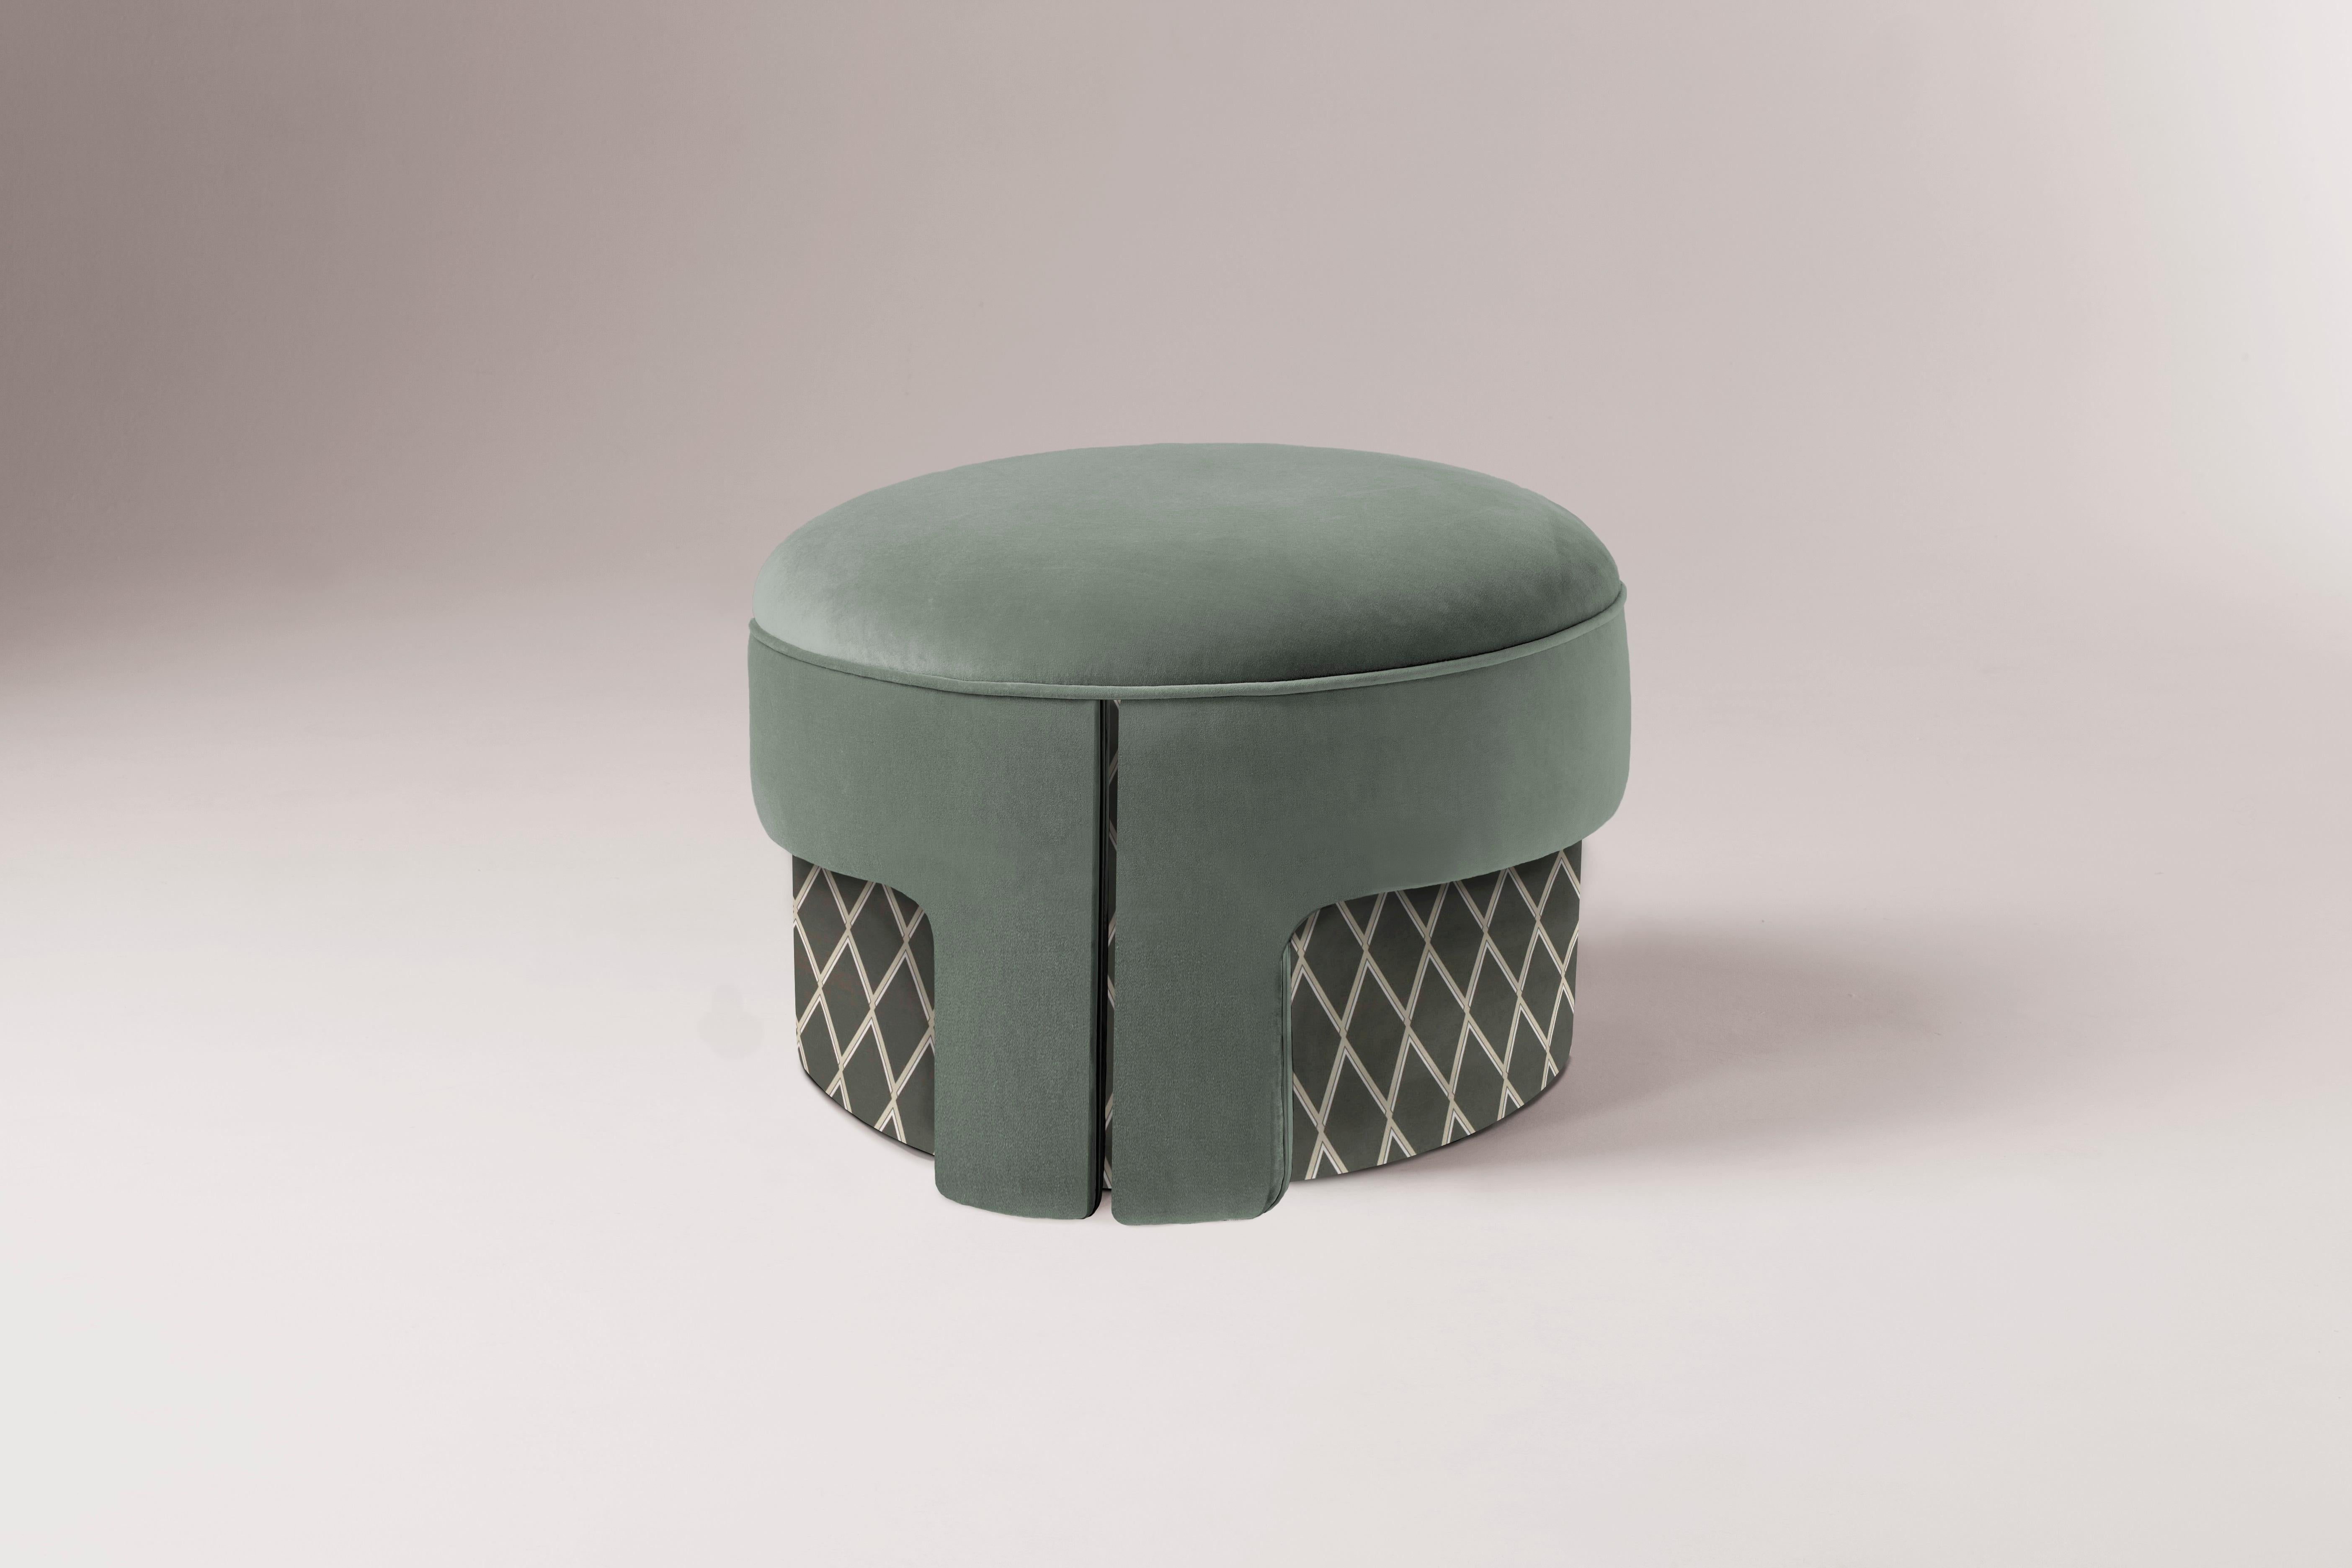 L’unité Pouf by Dooq
Dimensions: Ø 64 x H 44 cm 
Materials: Upholstery and piping fabric or leather

L’Unité armchair is proportional and sculptural, perfectly made to the human scale. It gathers strong upholstered shapes lightly supported on